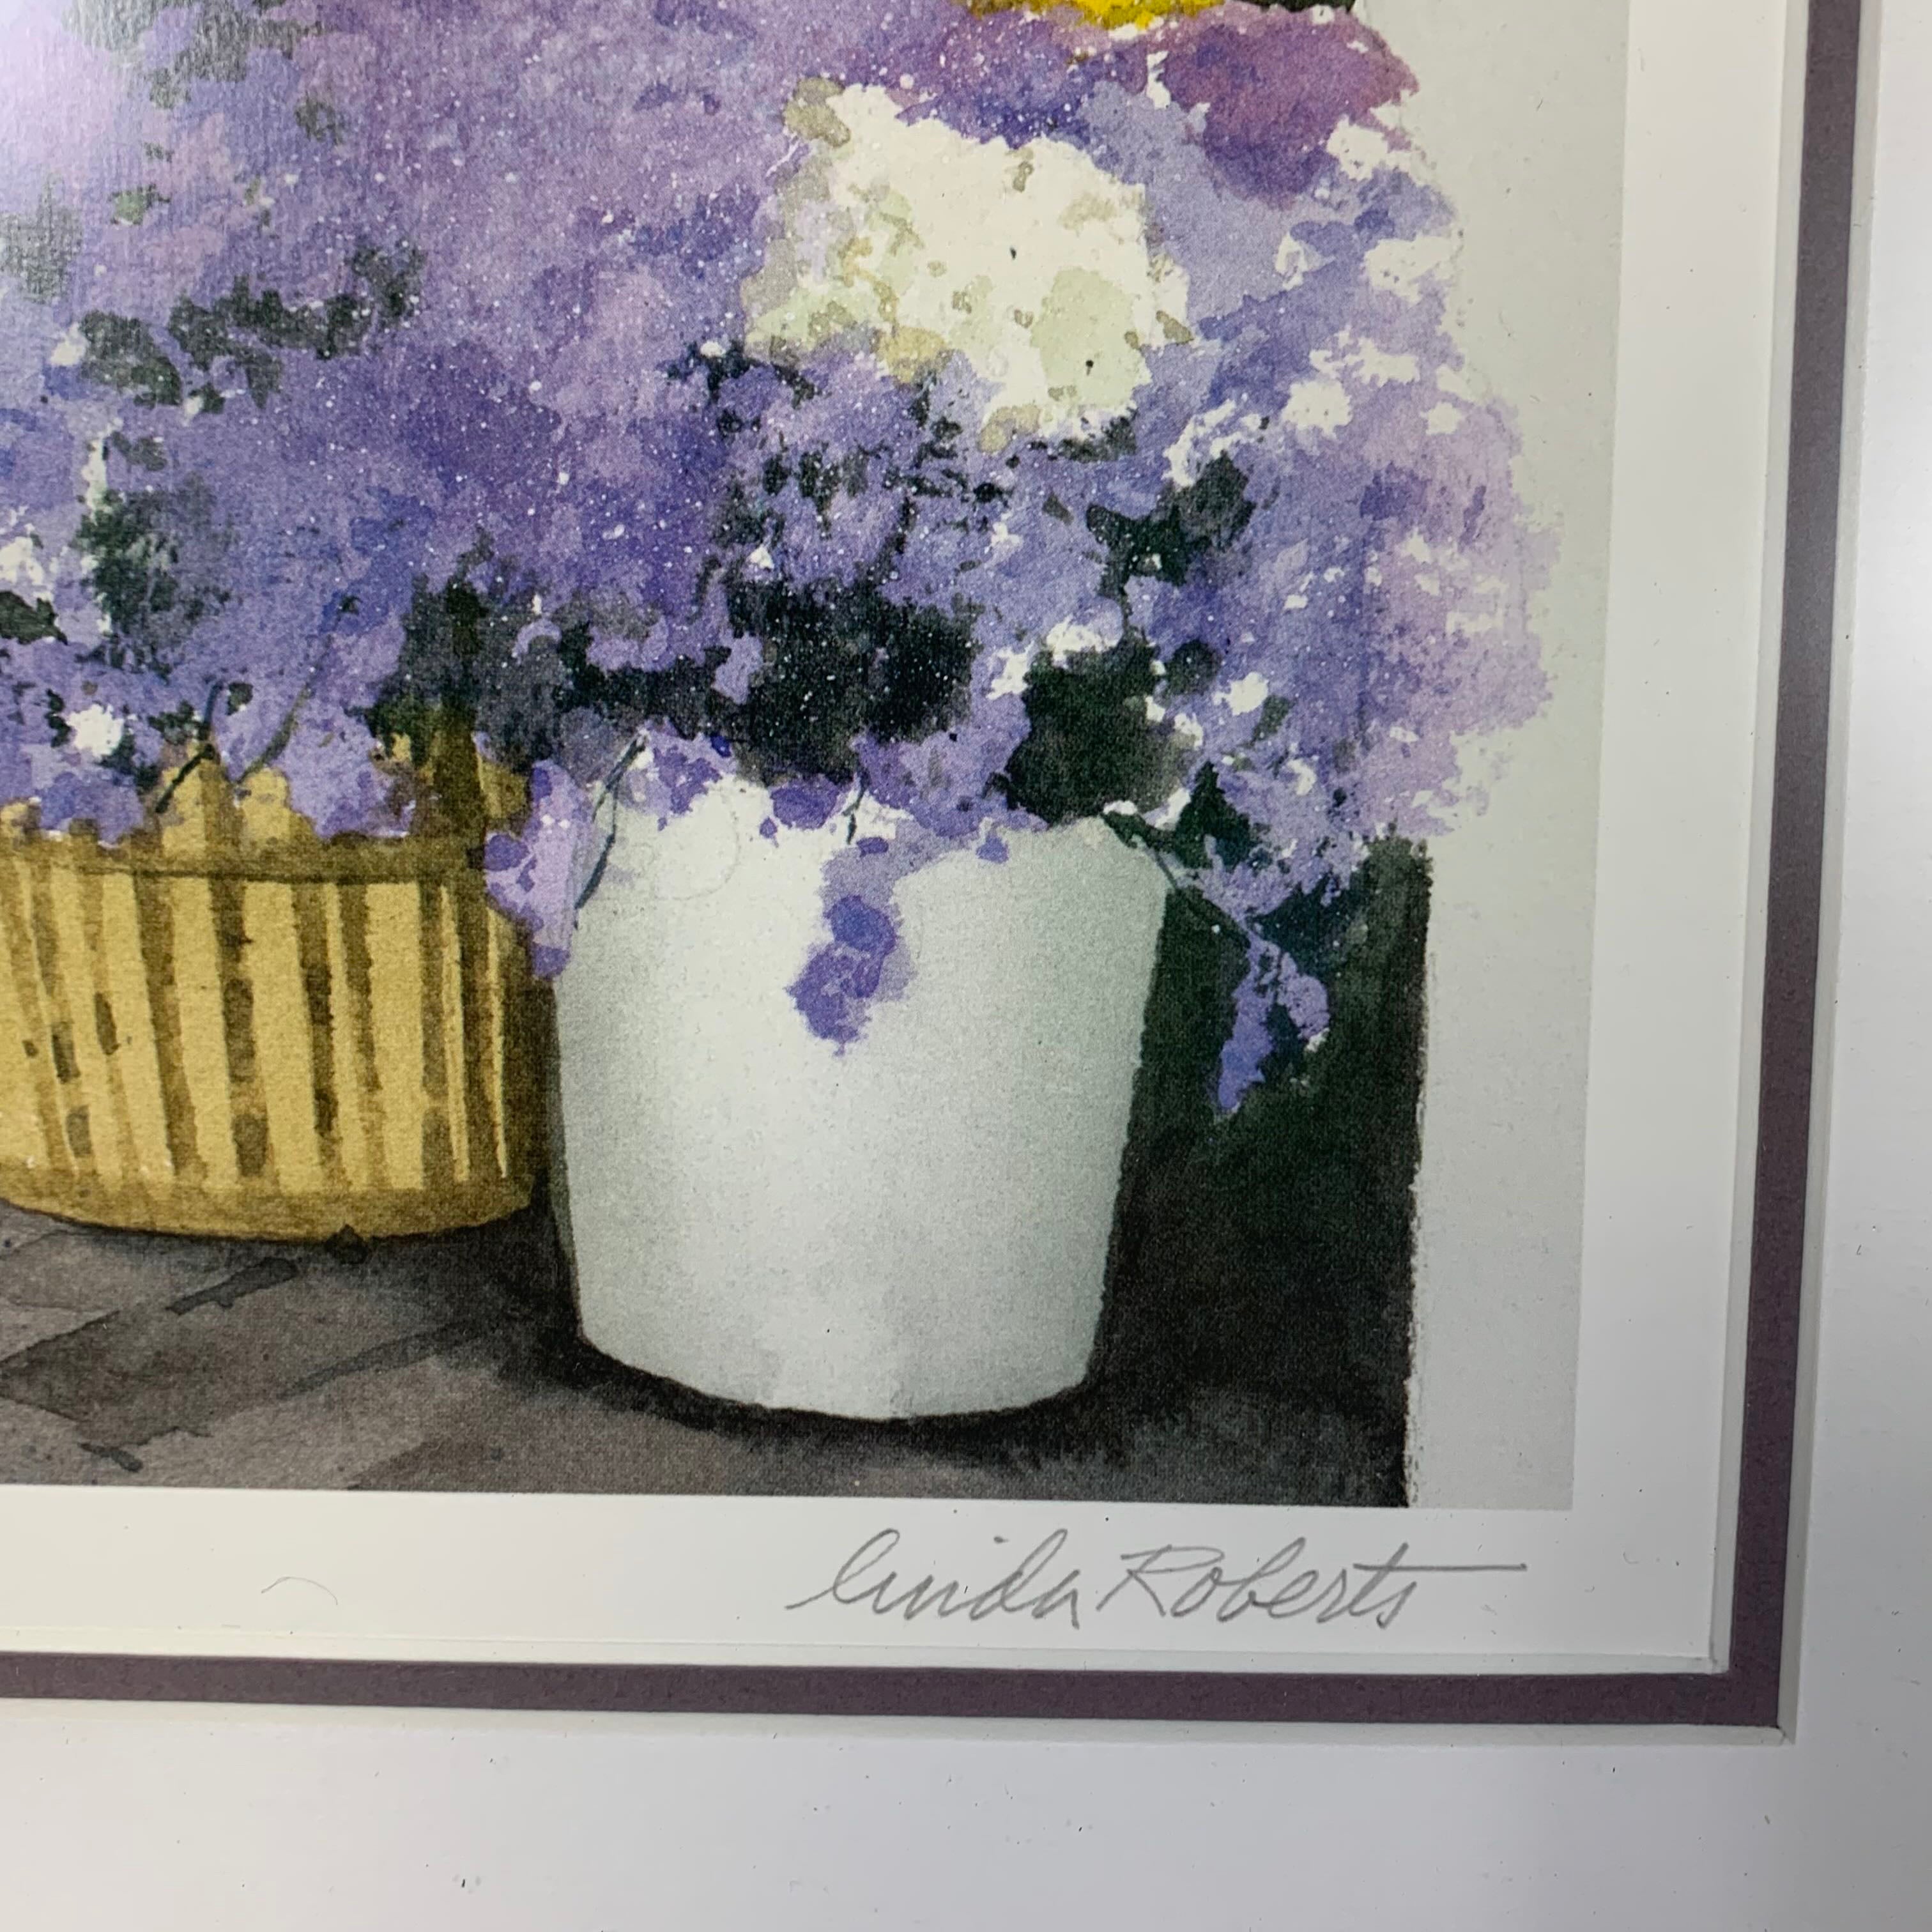 22"x 27.5" Flowers by Linda Roberts Framed and Signed Print 356/780